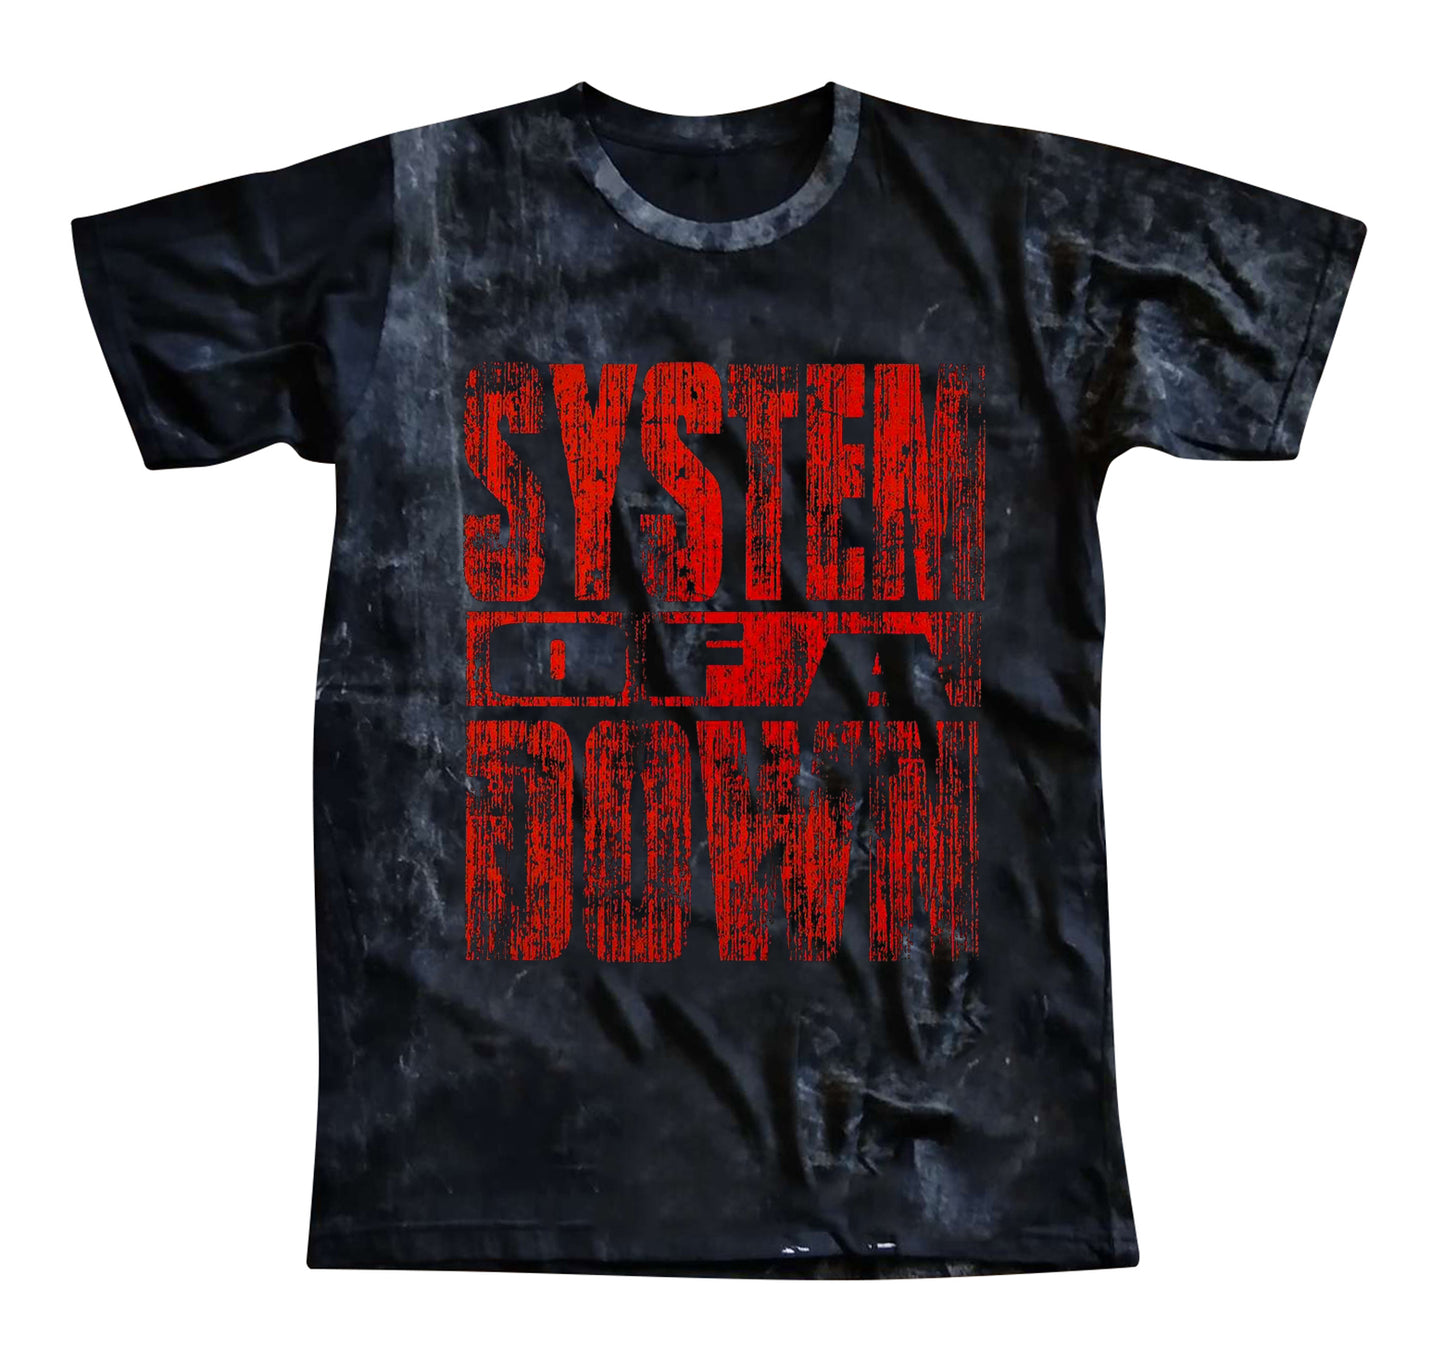 System Of A Down Short Sleeve T-Shirt